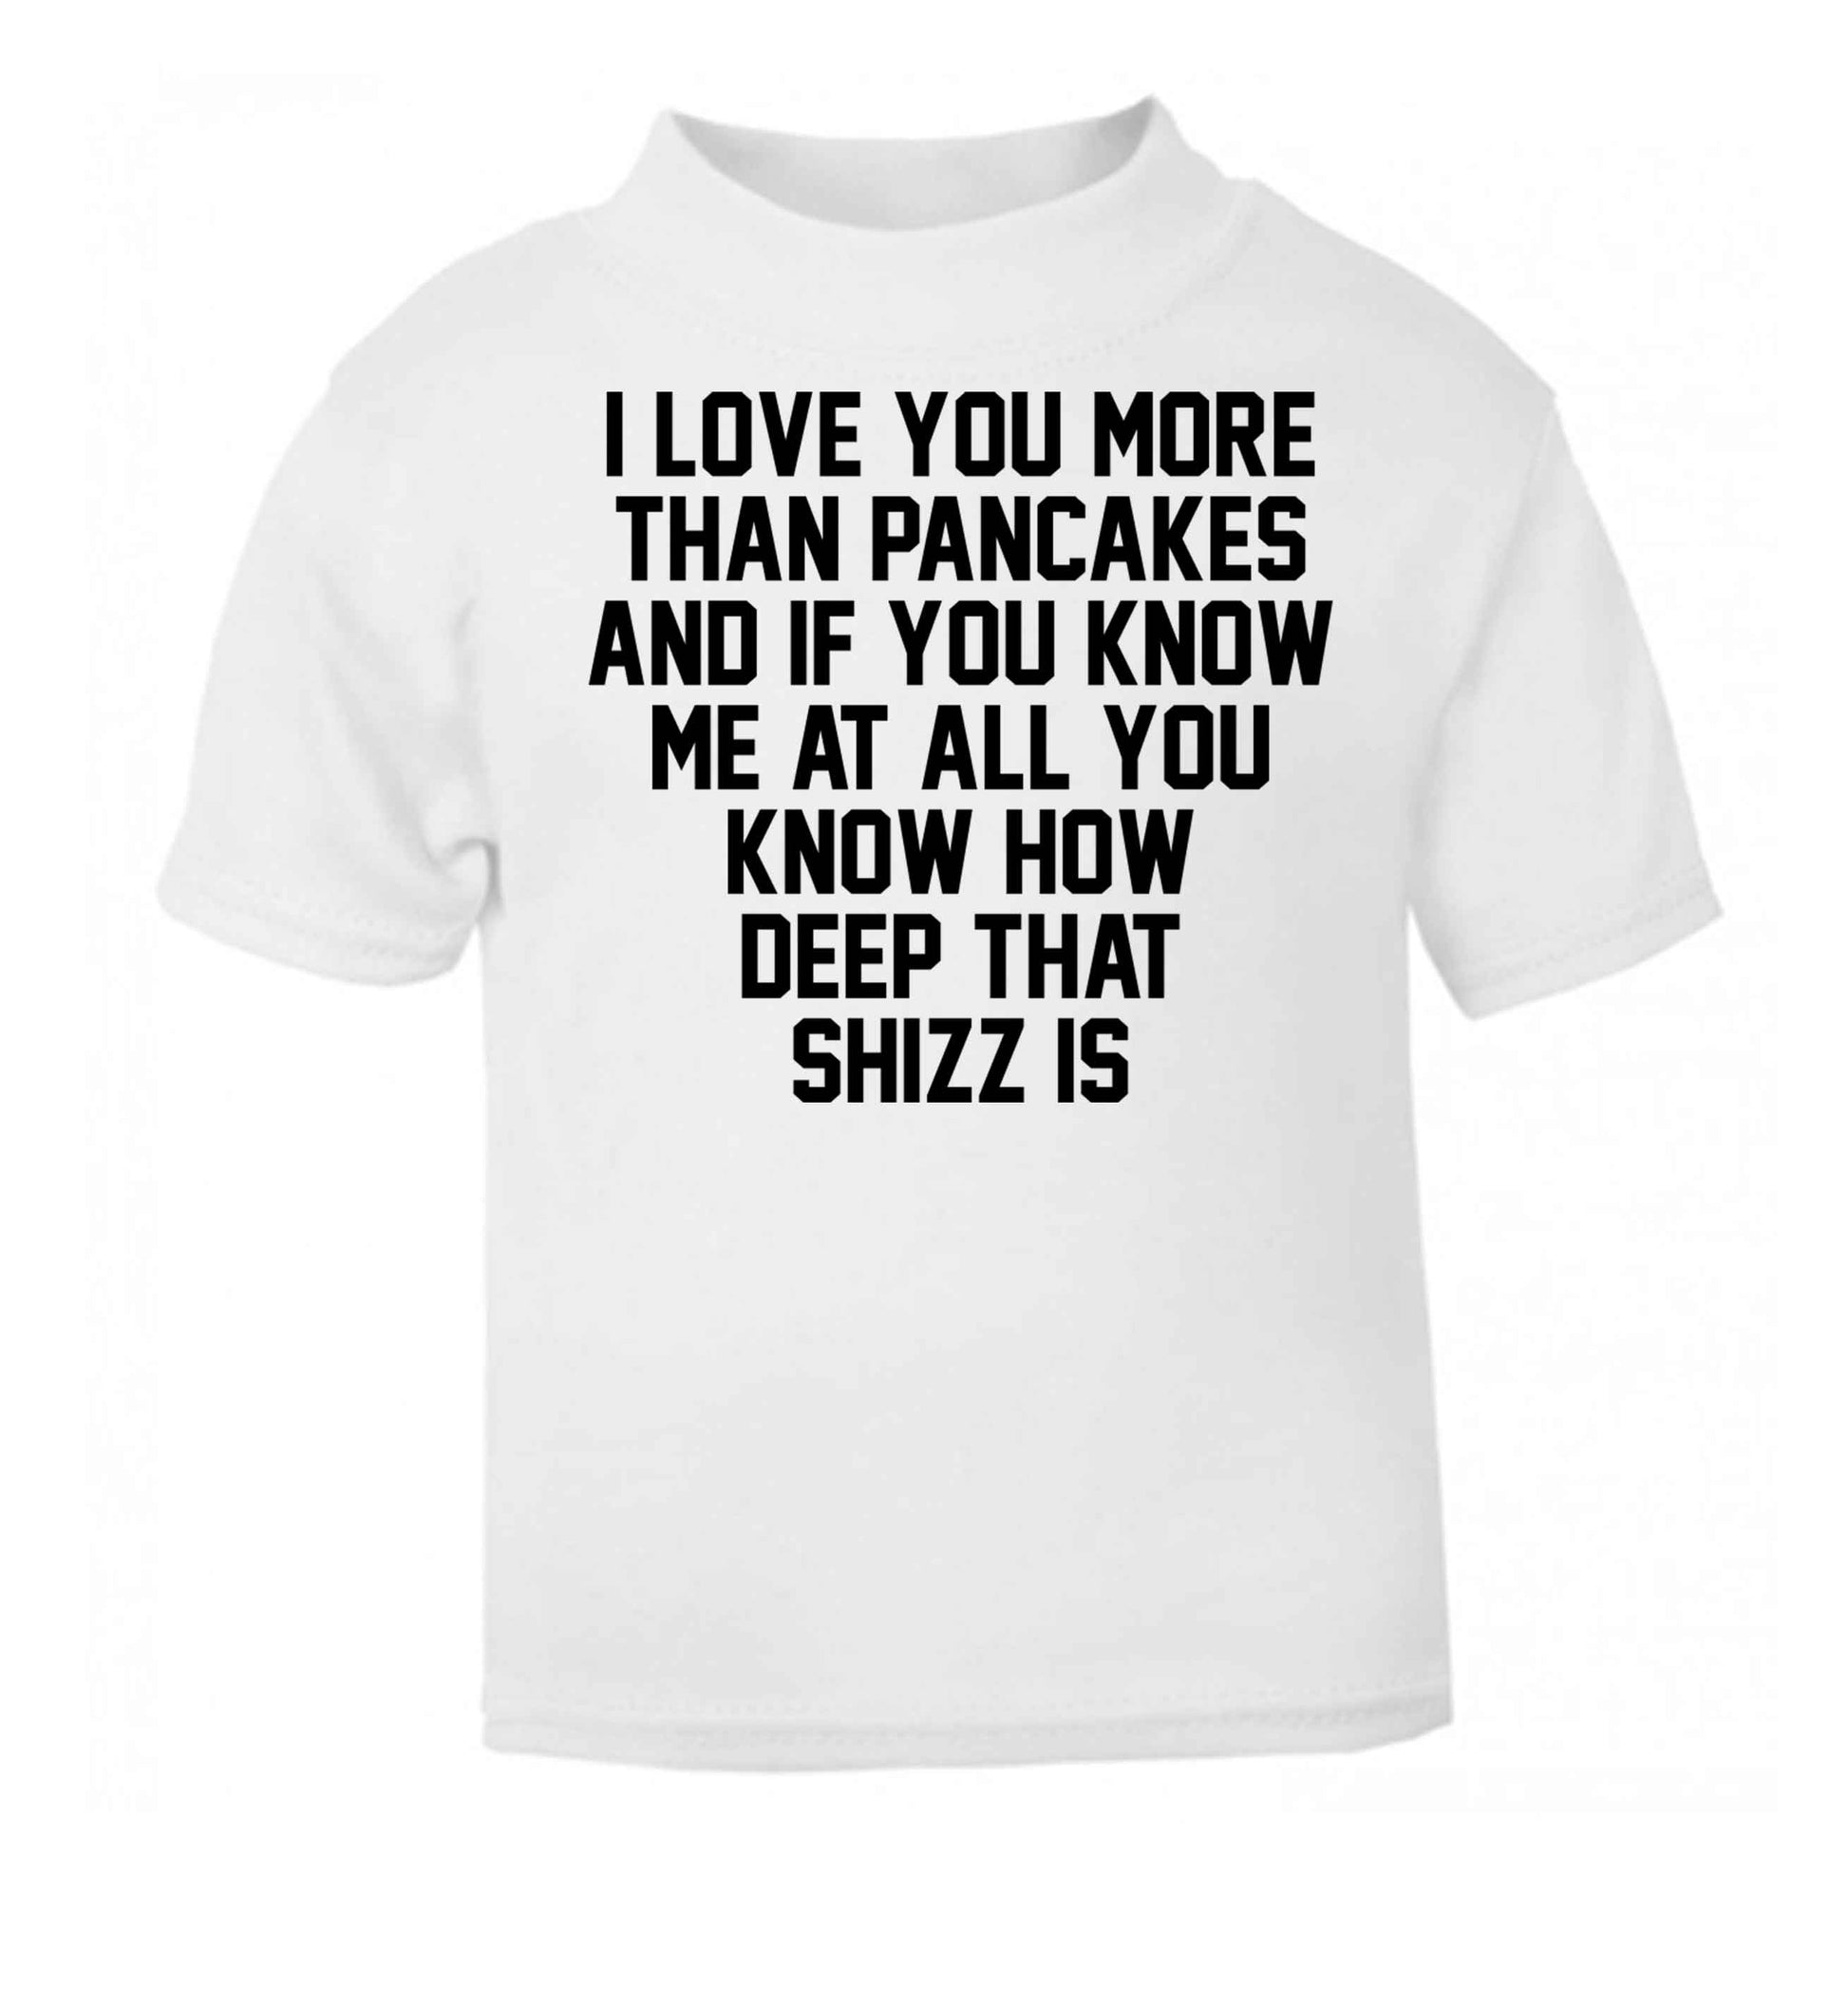 I love you more than pancakes and if you know me at all you know how deep that shizz is white baby toddler Tshirt 2 Years